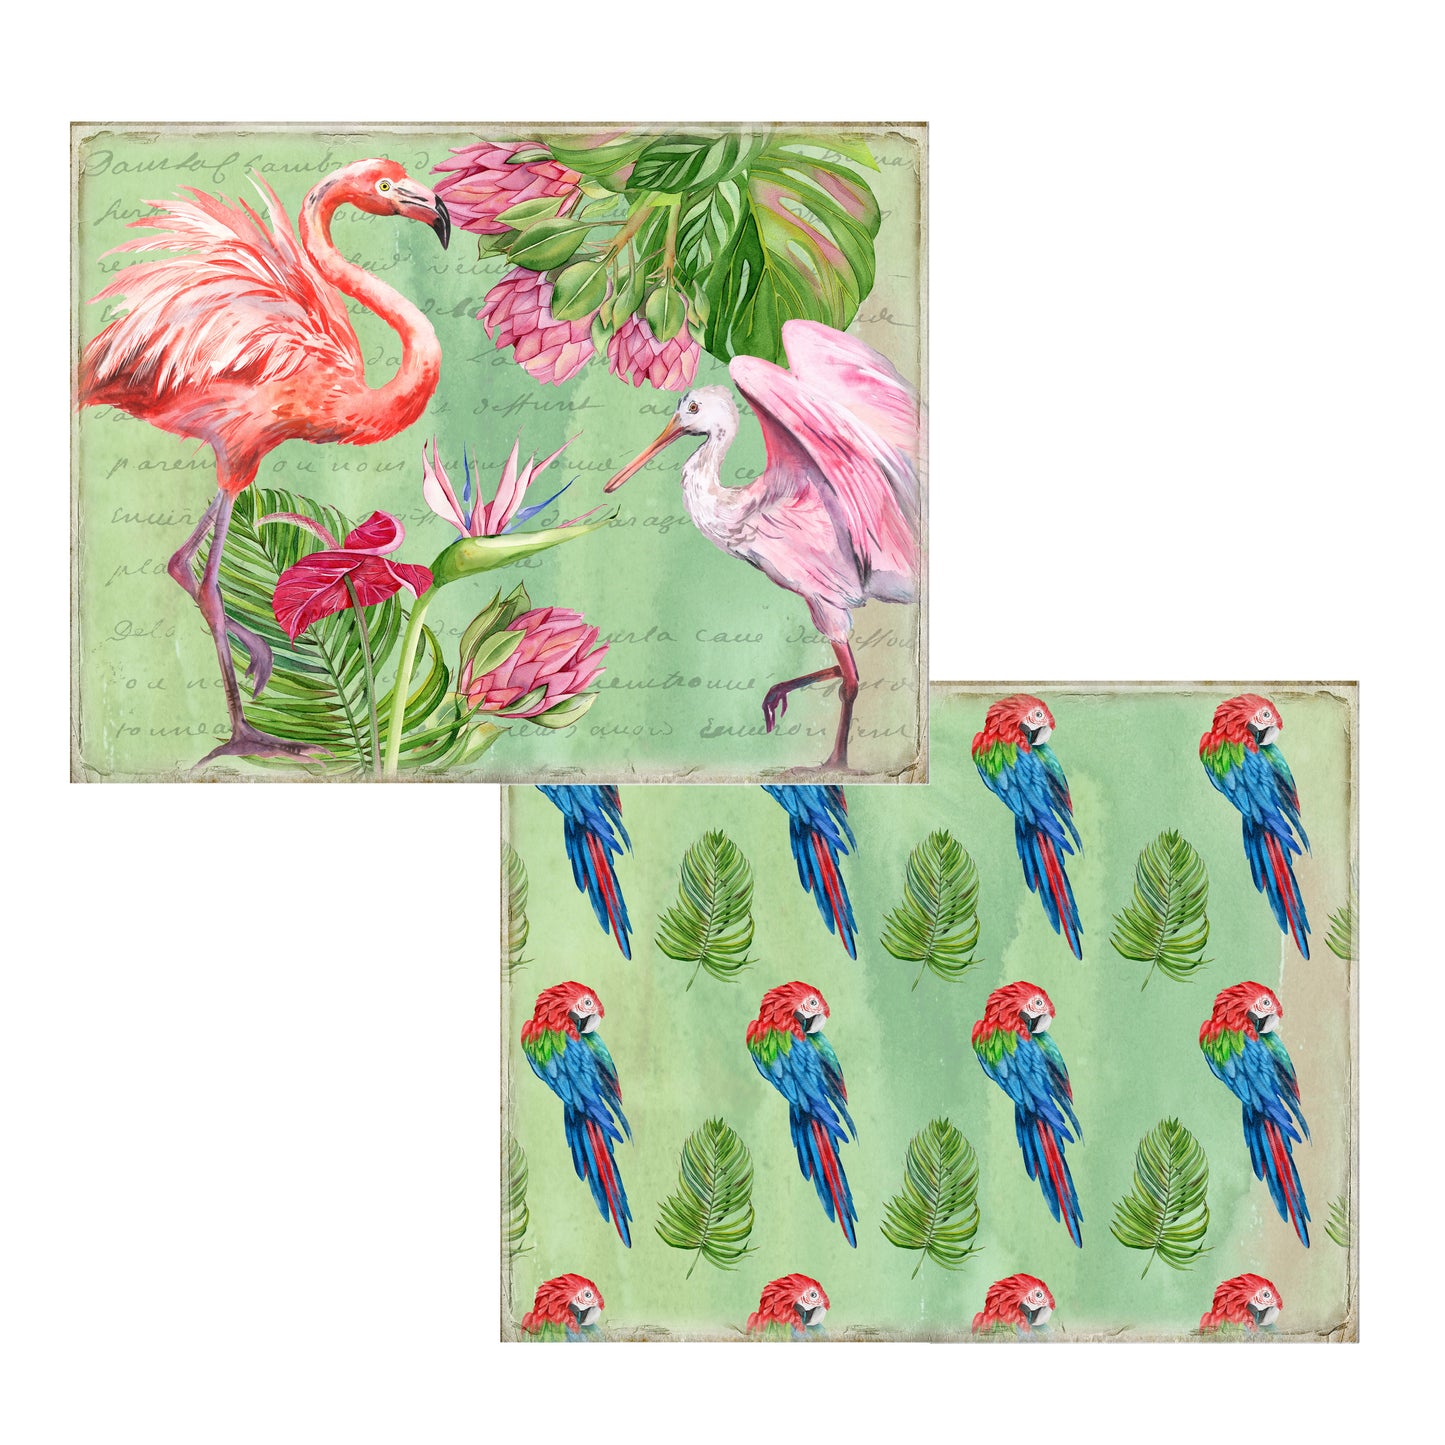 Exotic Birds Journal Pages - 23-7021